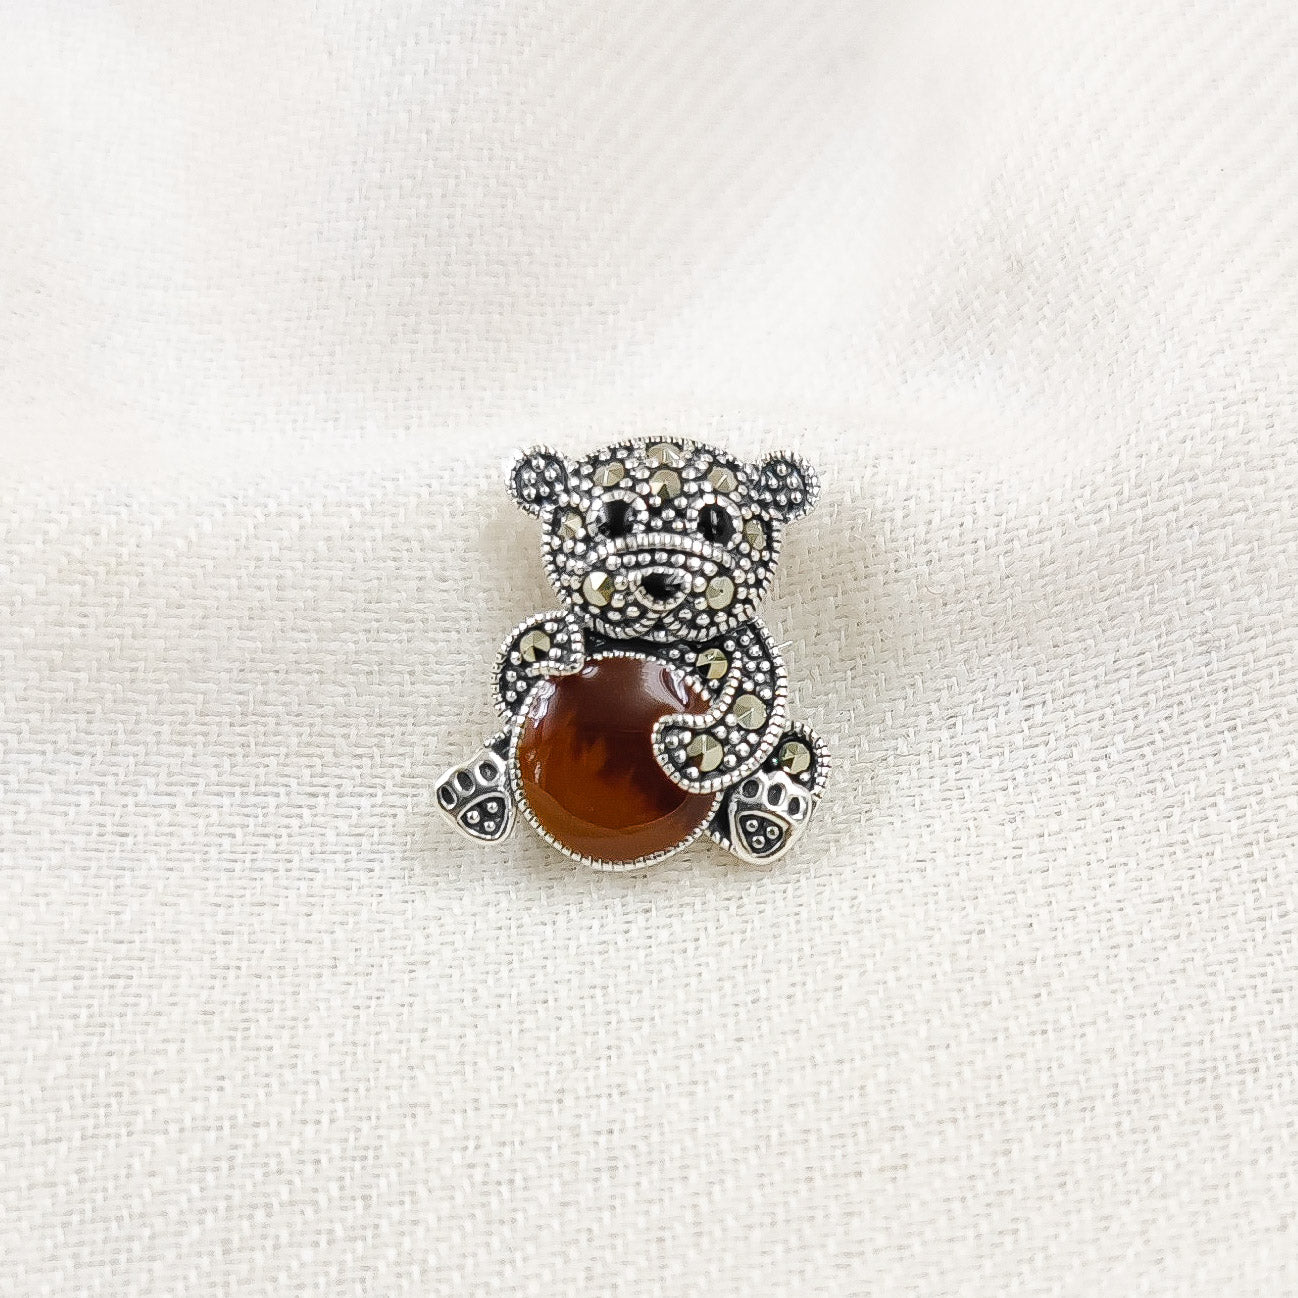 Silver Jewelry Brooches and Lapel Pins by Jauhri 92.5 Silver - Marcasite Teddy Brown Brooch And Pendant